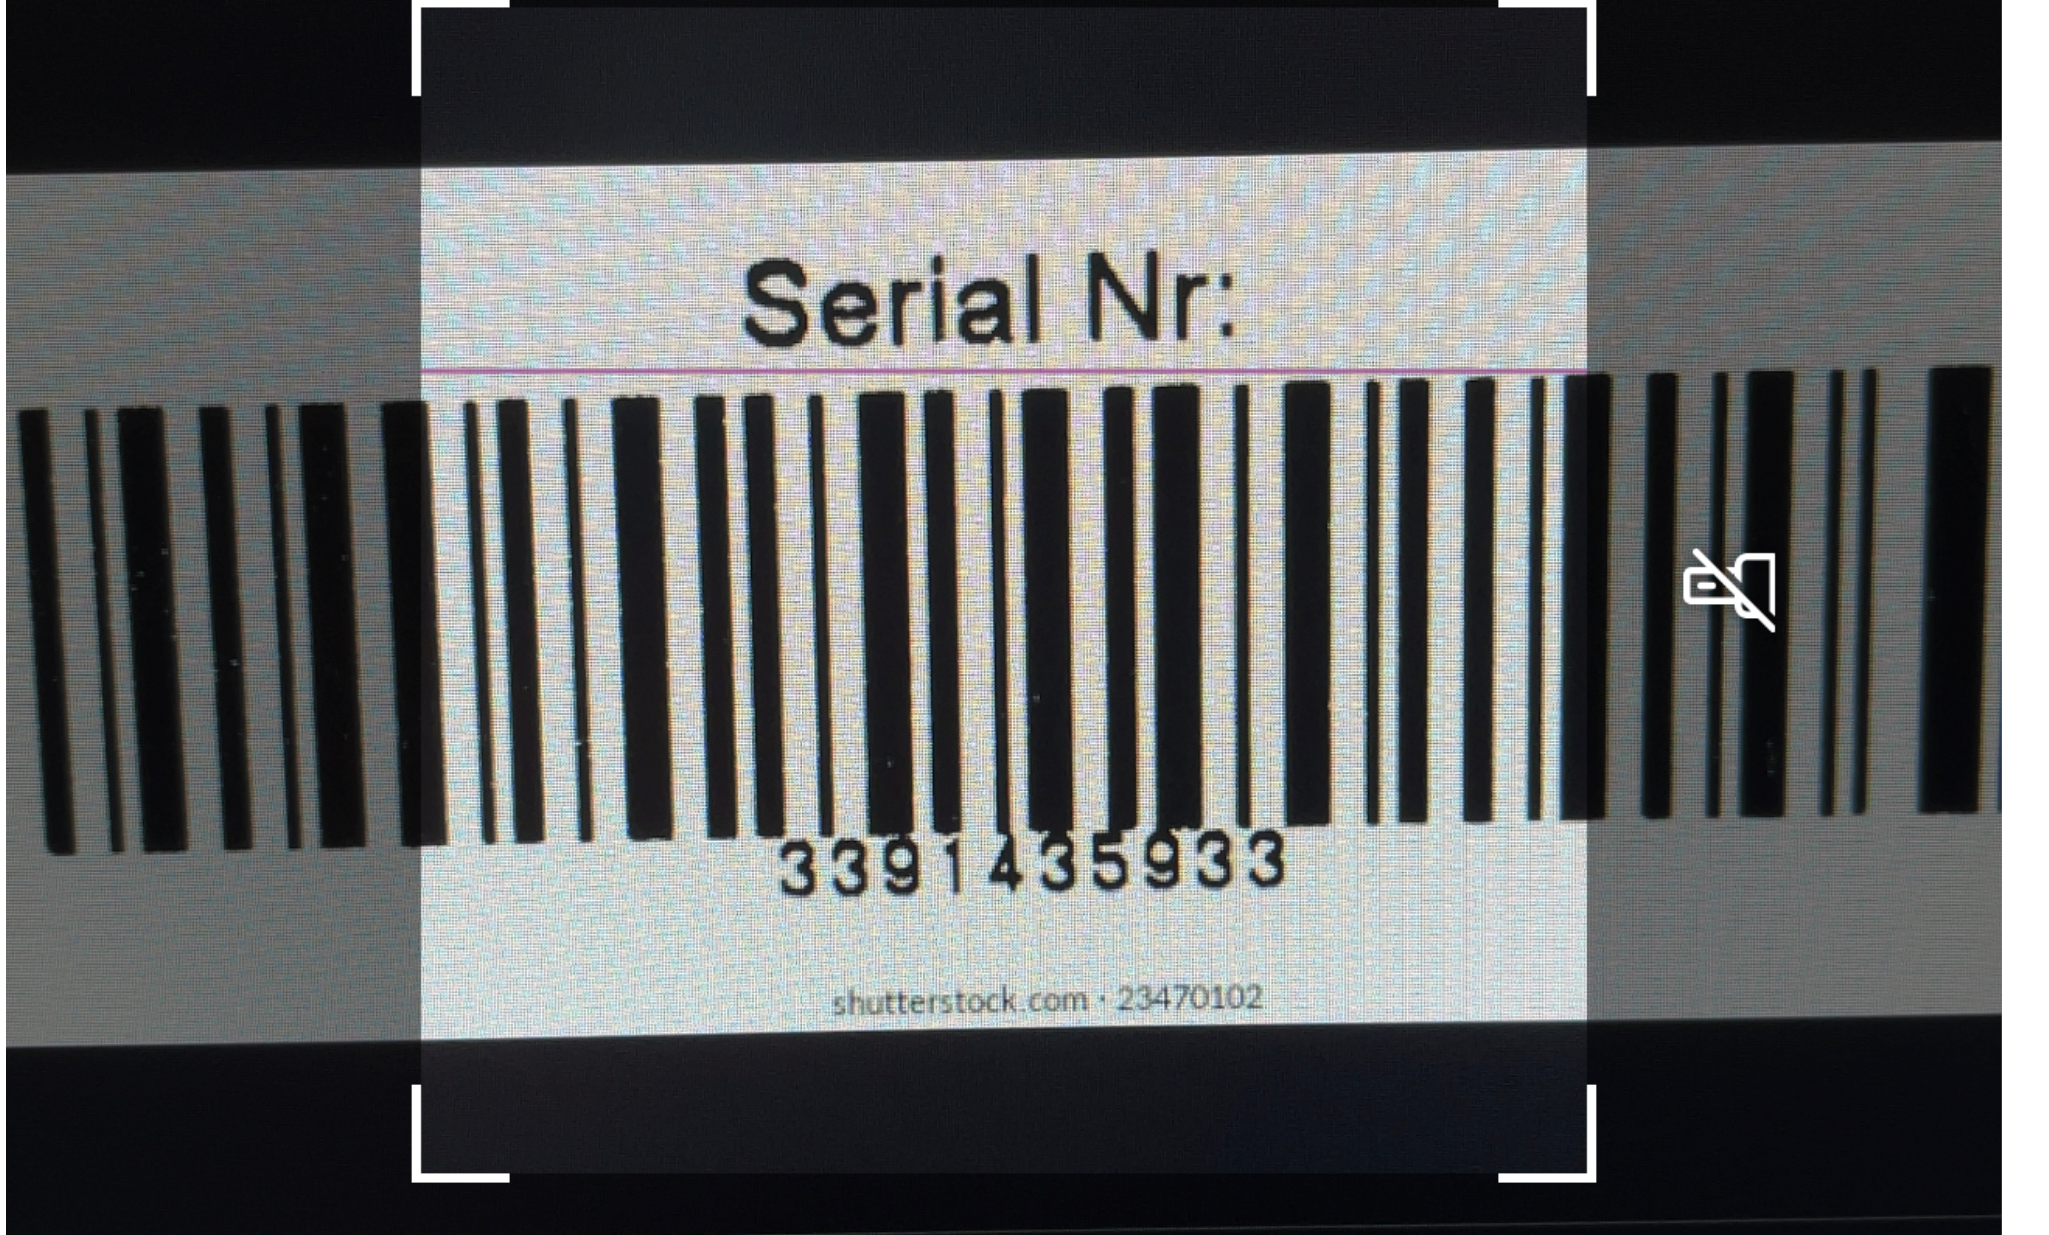 iOS app also allows the user to scan barcodes